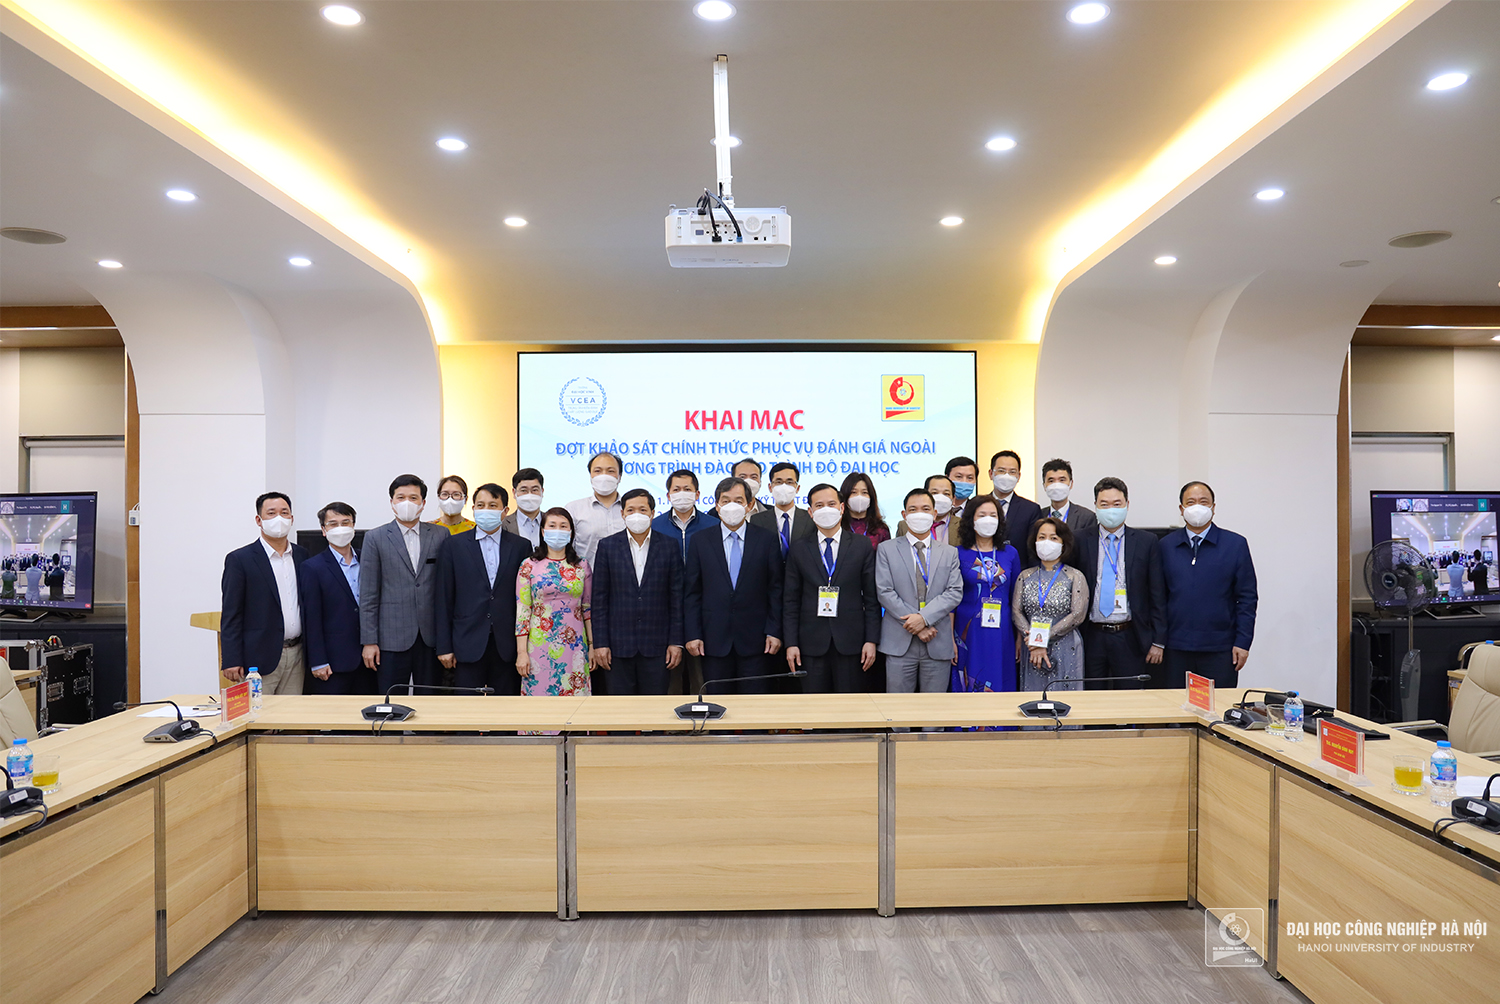 Opening Ceremony of the External Evaluation of 04 training programs: Electrical Engineering Technology, Computer Engineering Technology, Human Resource Management, Garment and Textile Technology